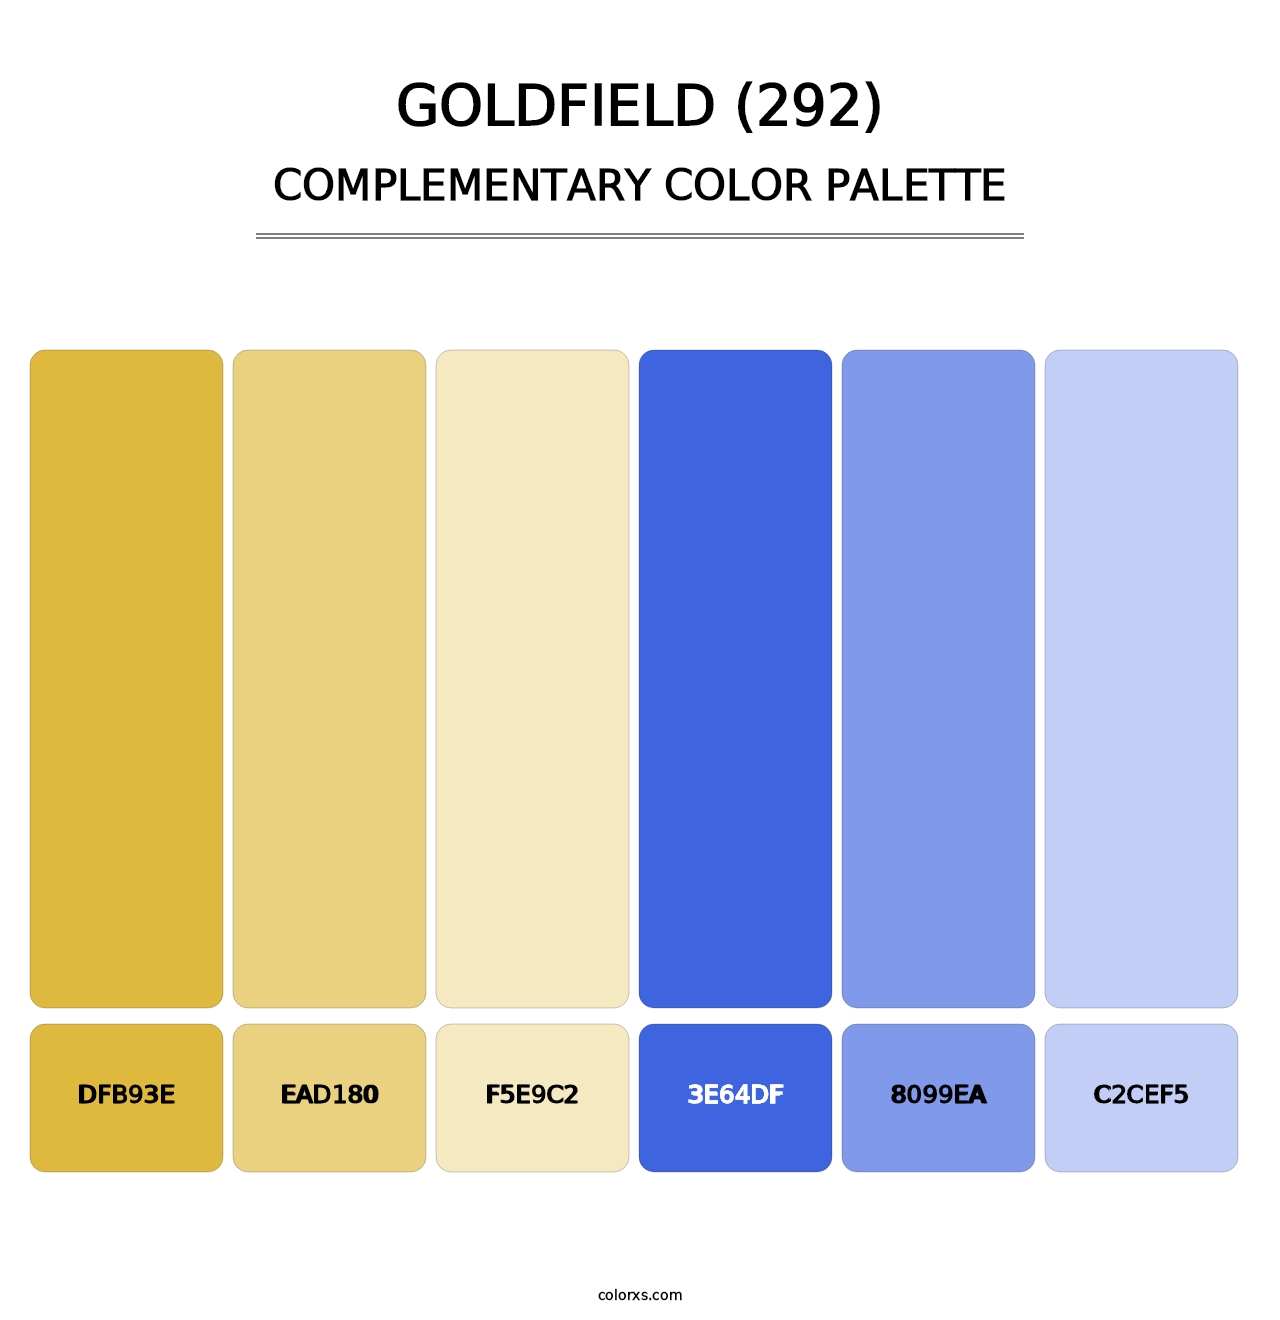 Goldfield (292) - Complementary Color Palette